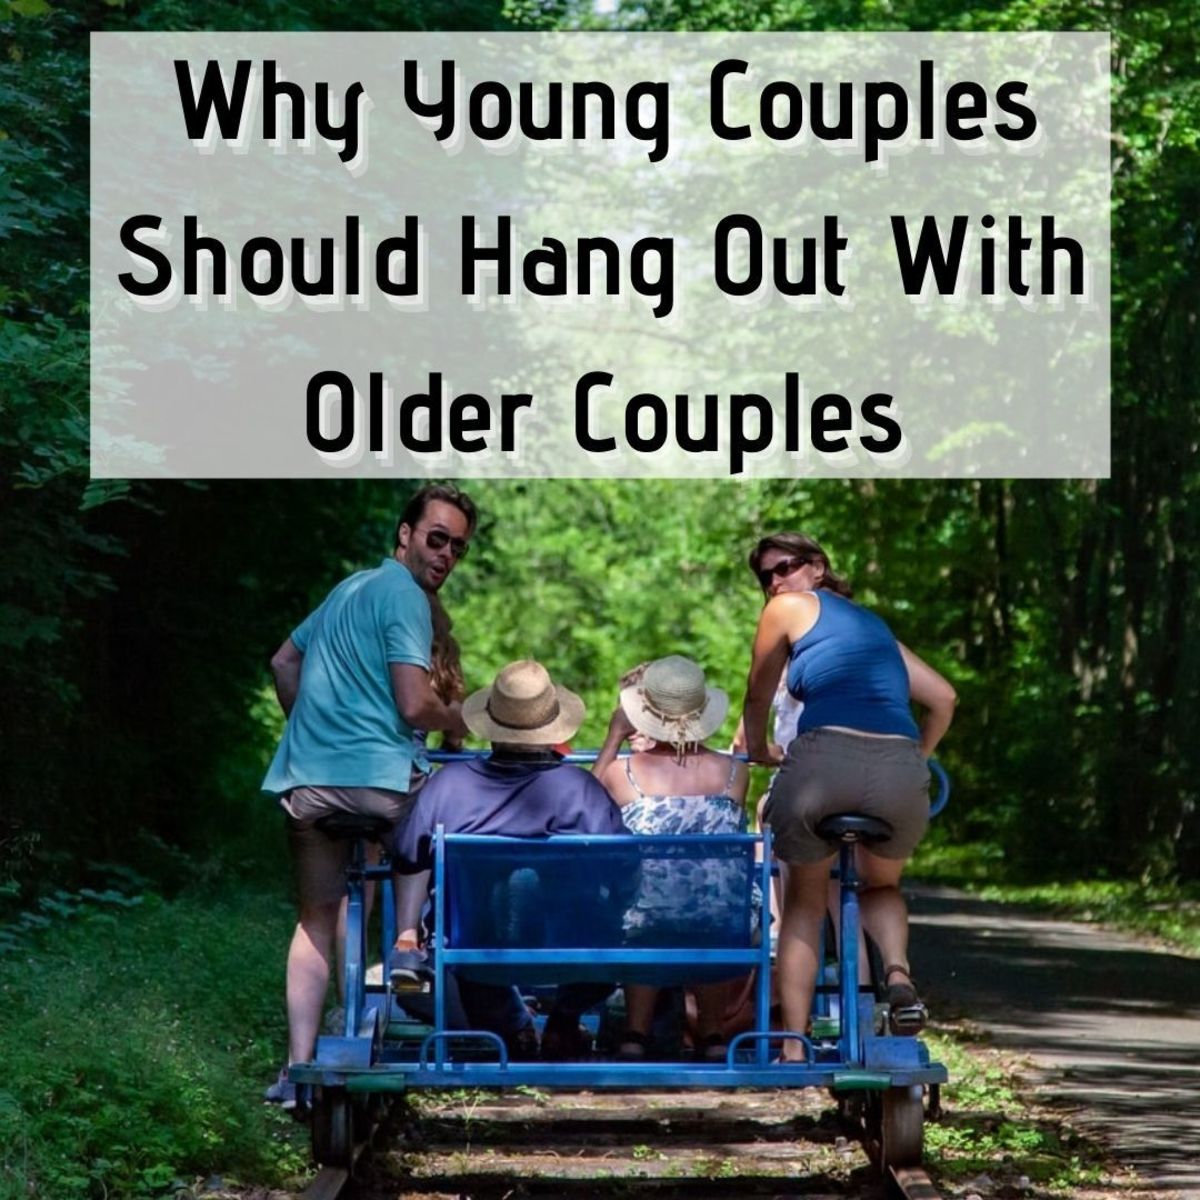 Why Young Lovers Should Hang Out With Older Couples